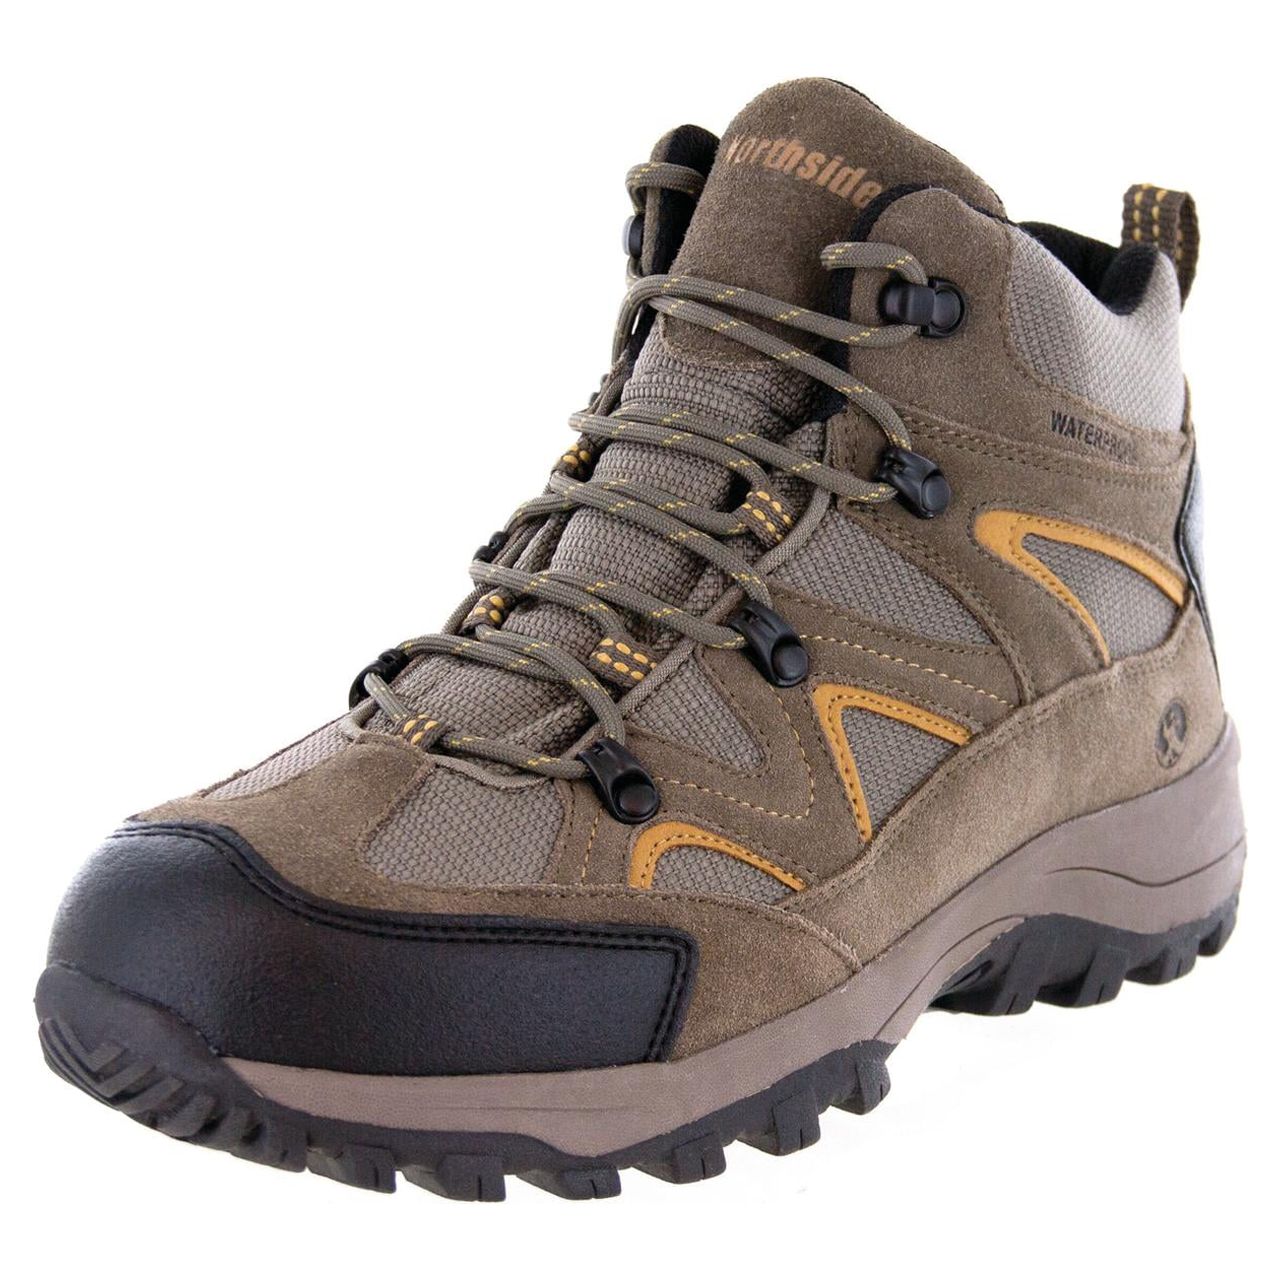 Northside Men's Snohomish Mid Waterproof Hiking Boot (Wide Available) - image 1 of 6